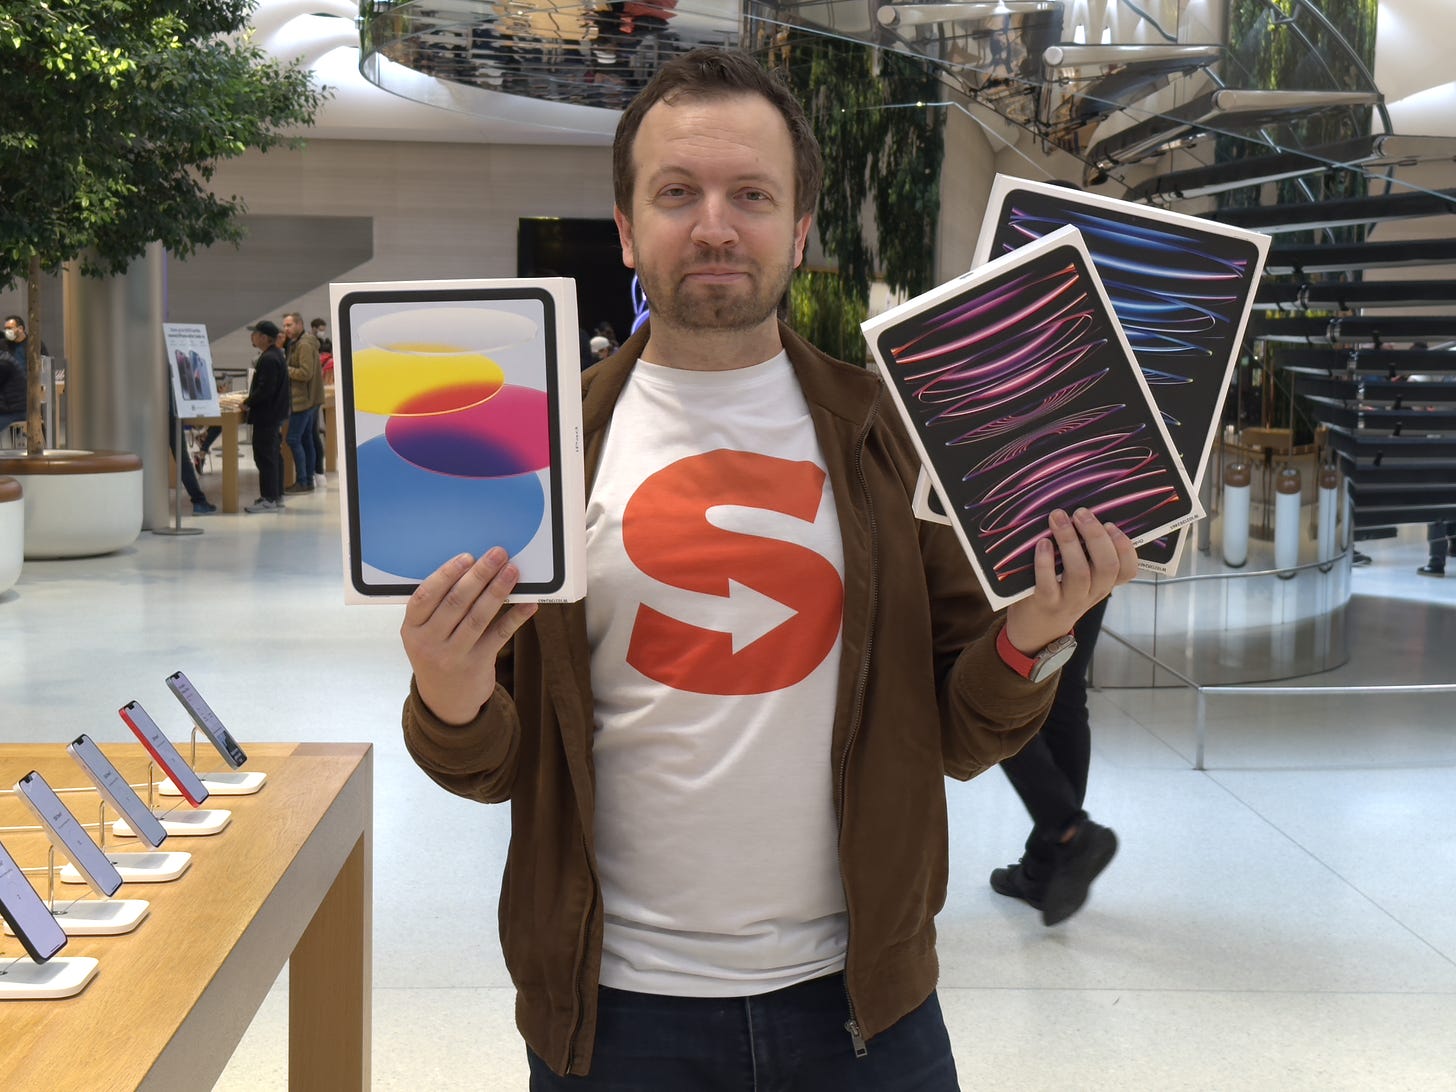 Matt Swider with the iPad Pro at the Apple Store 5th Avenue in NYC